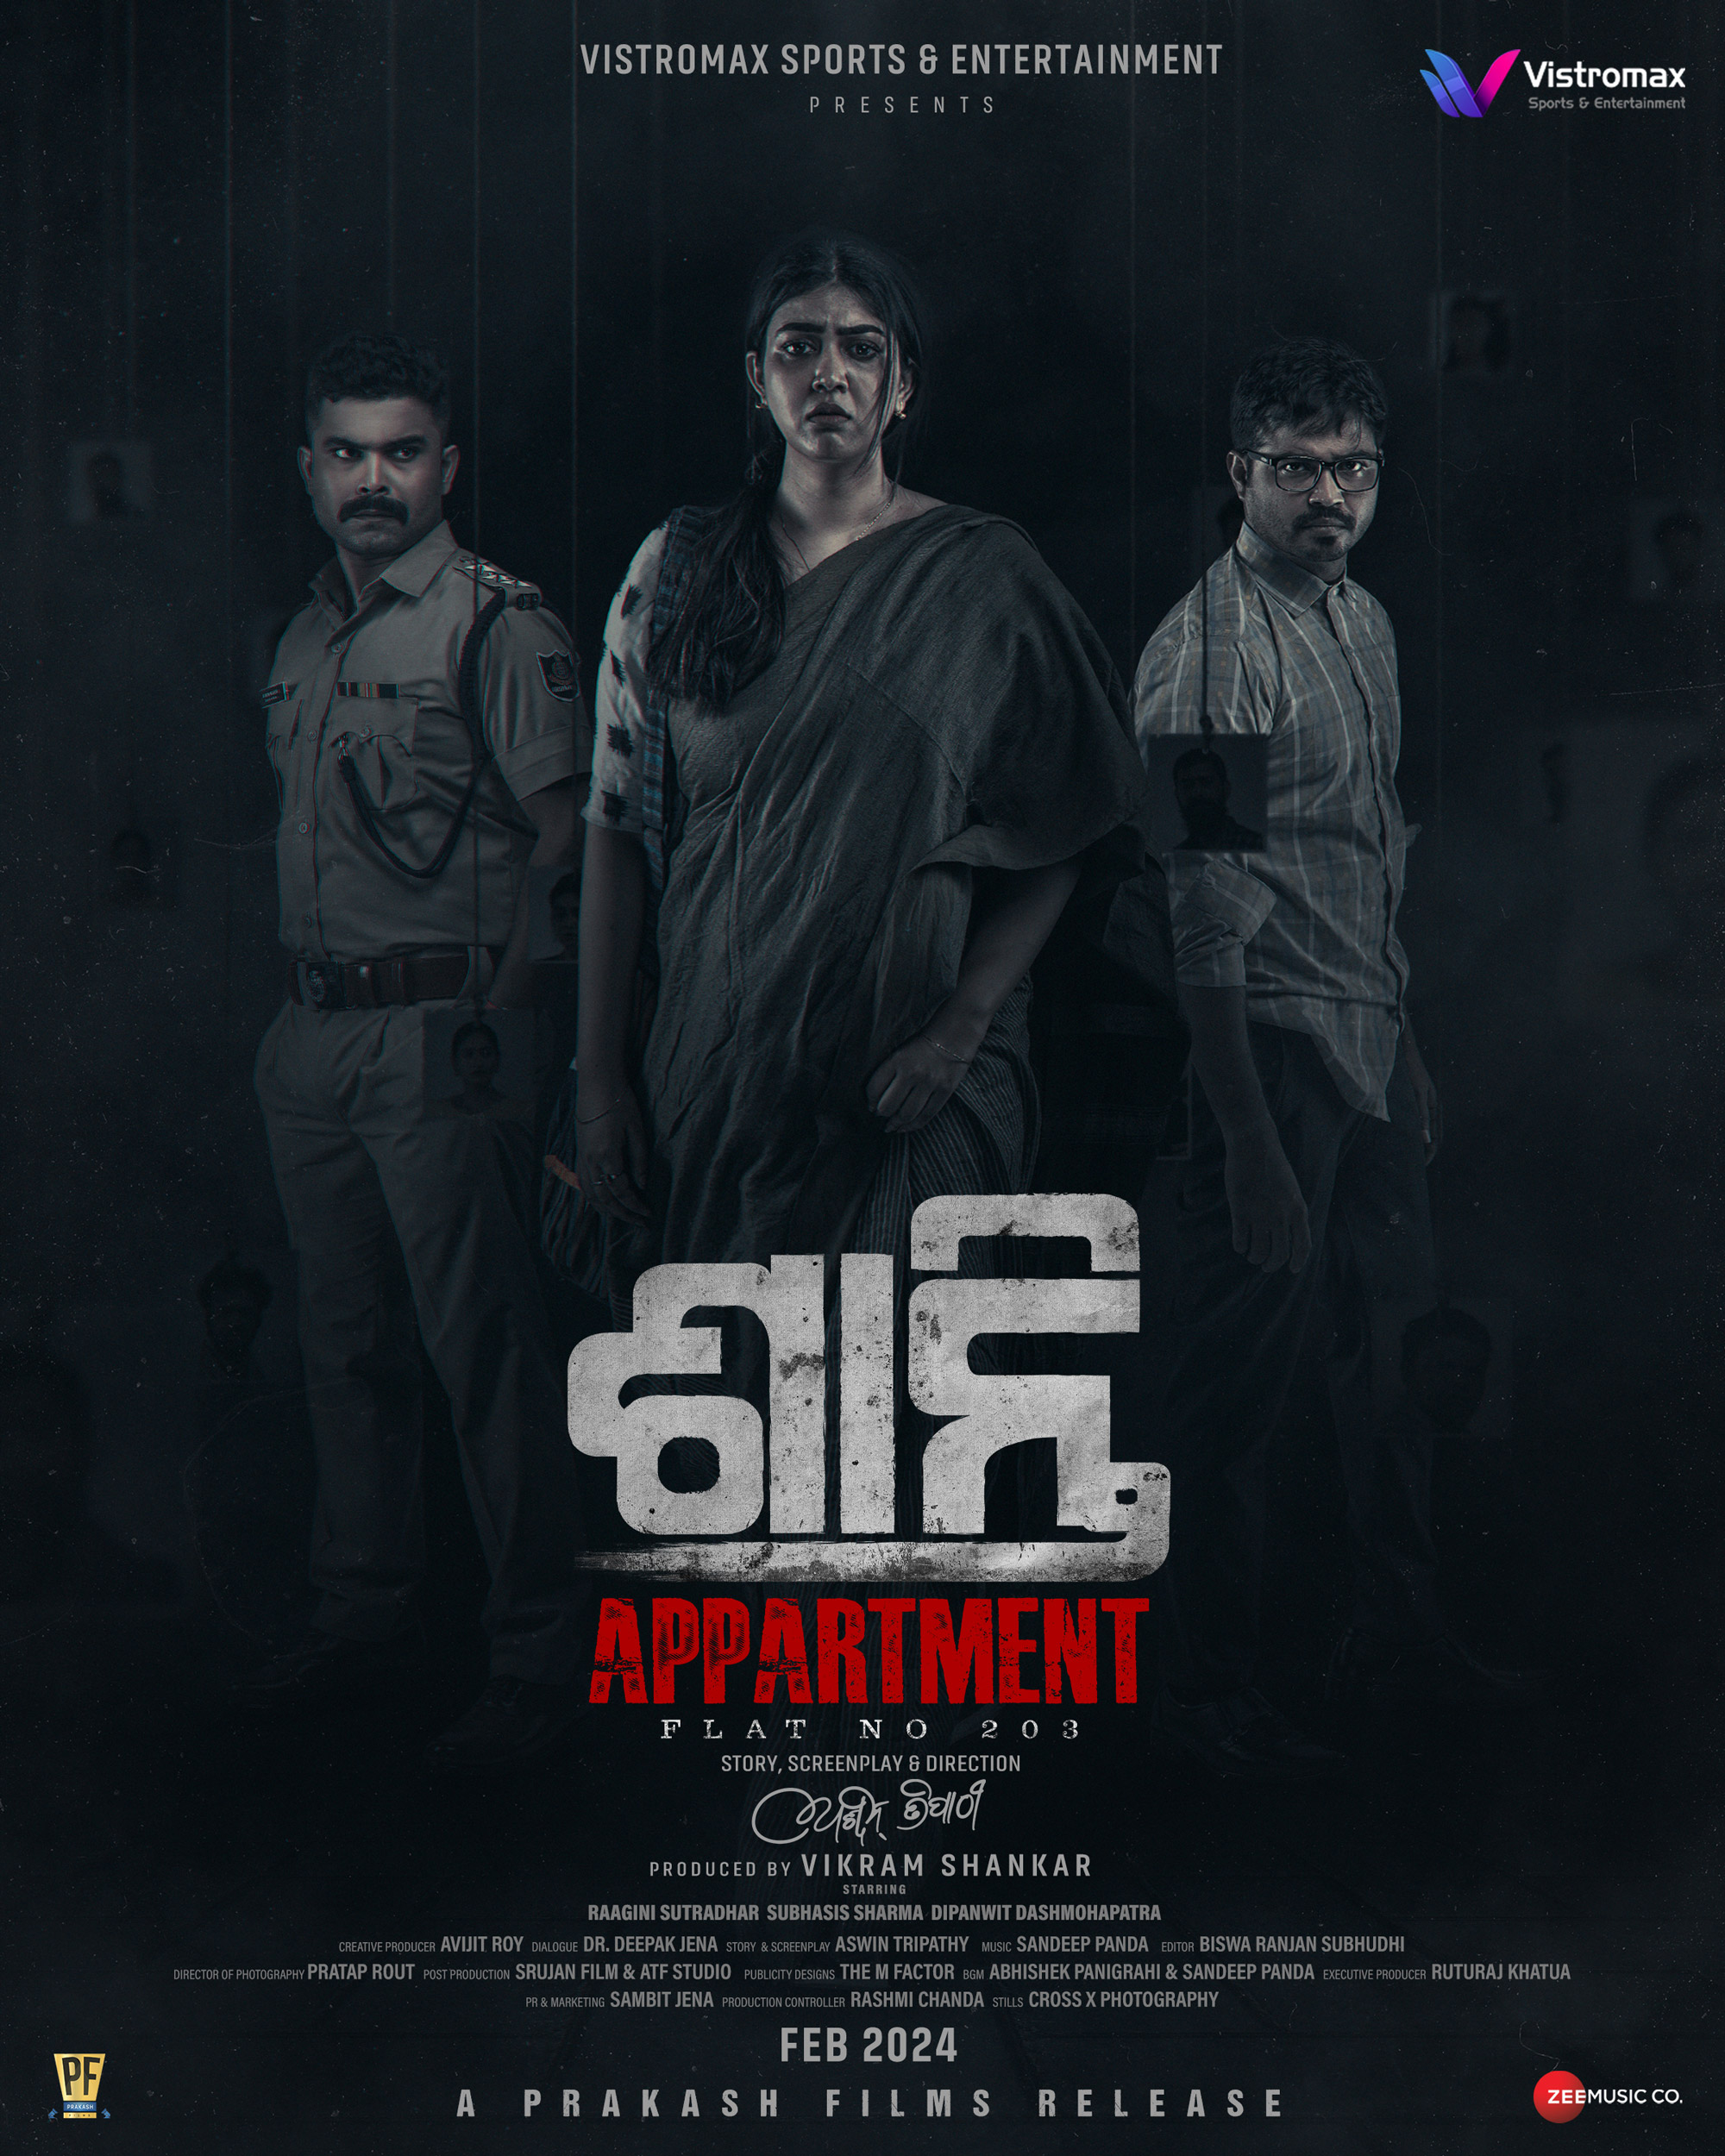 'Shanti Appartment - Flat No 203' official poster